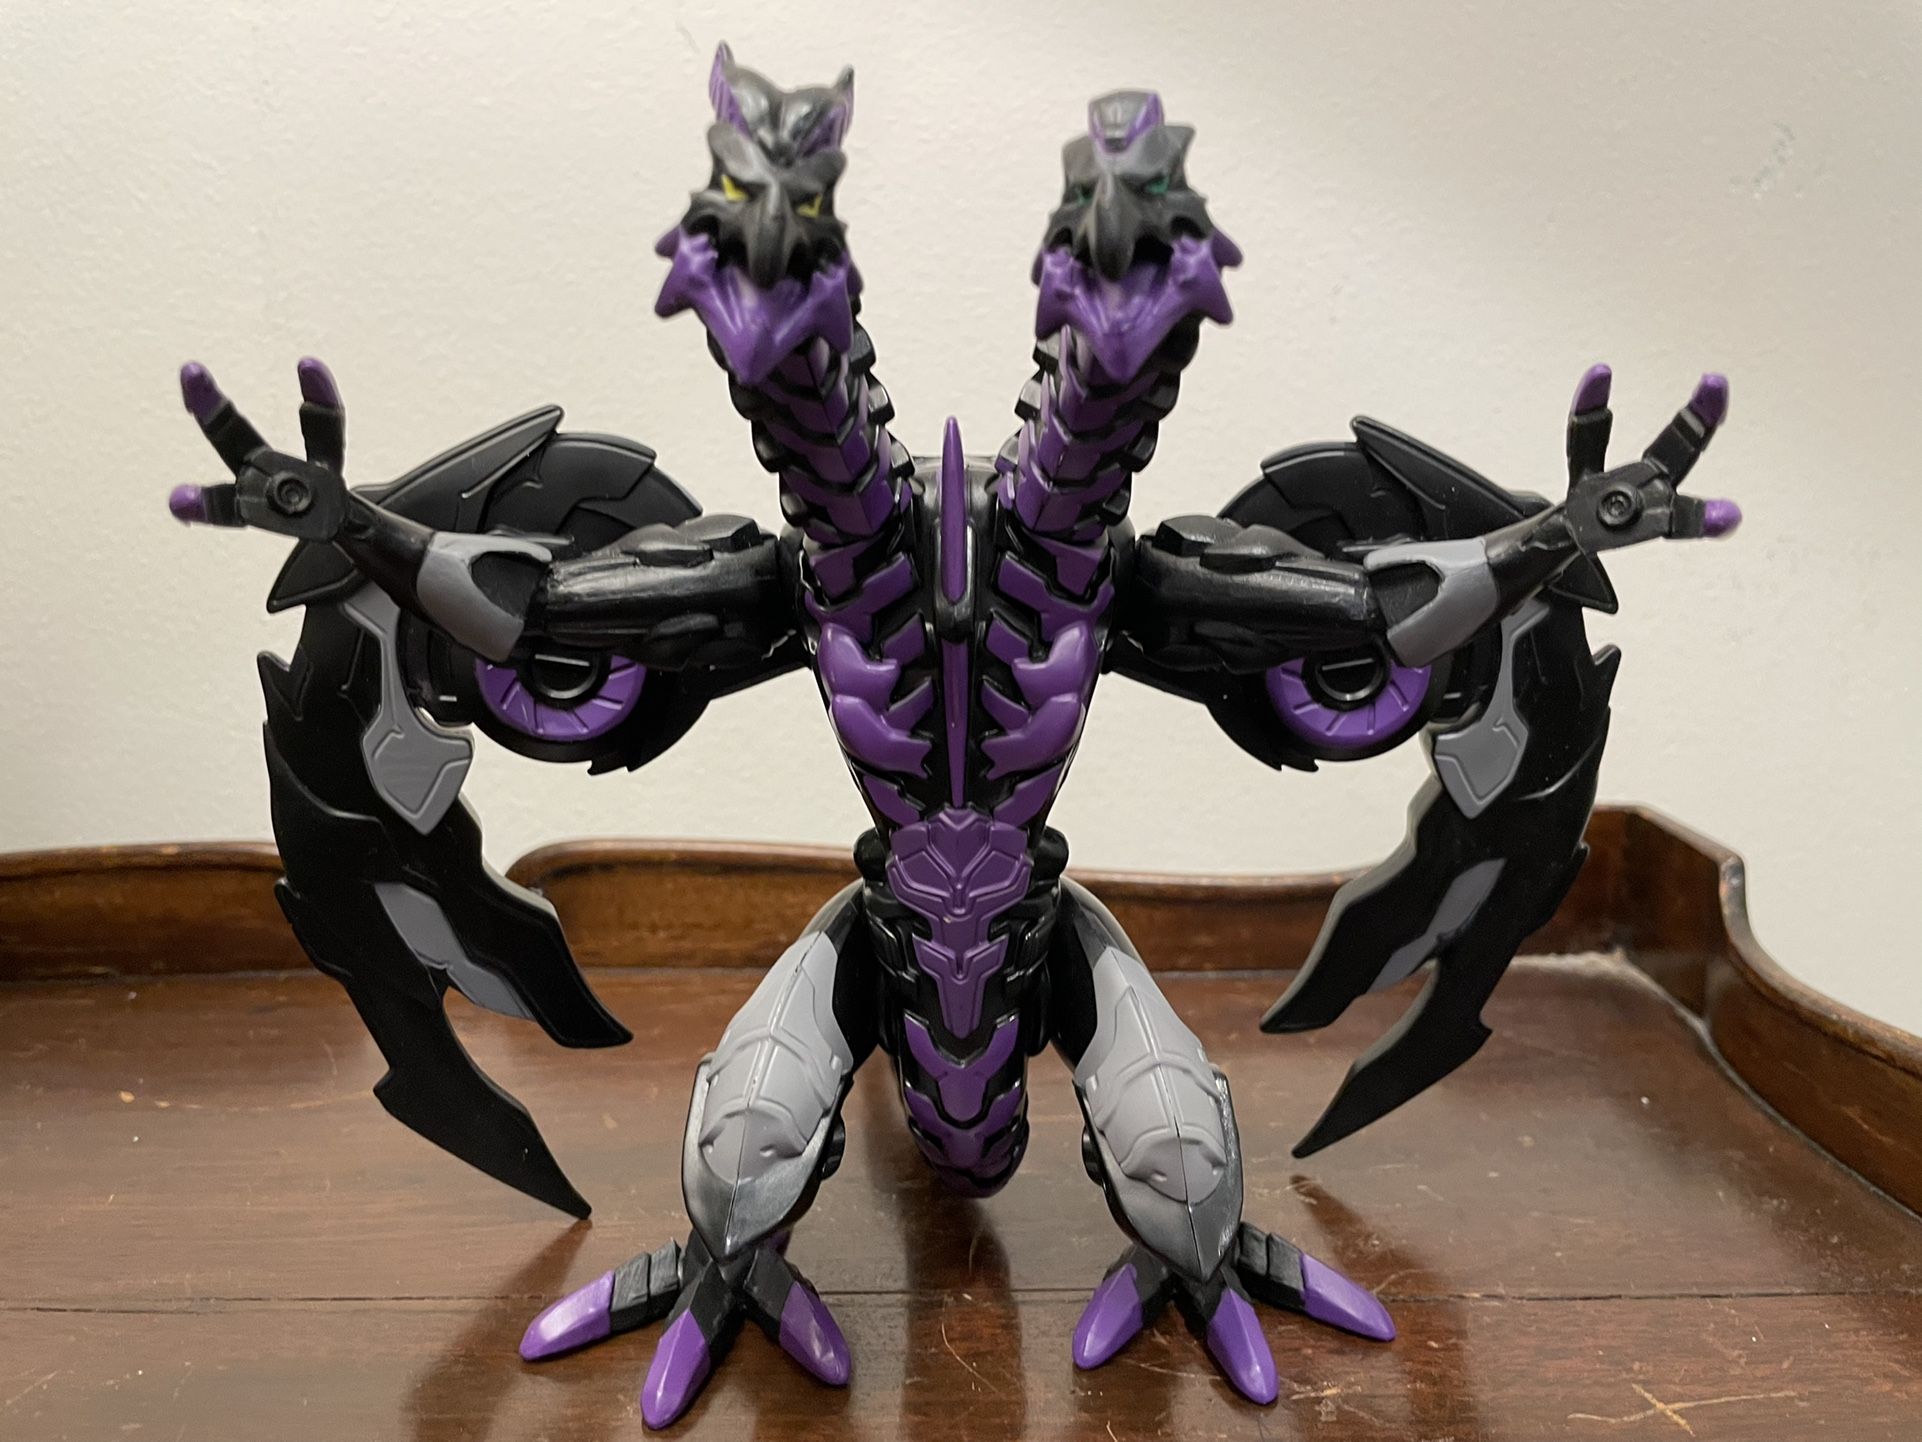 Bakugan Battle Planet Nillious Figure 10 Inches Spin Master LTD Rare. This very neat action figure measures approximately 10 inches from the tail to t